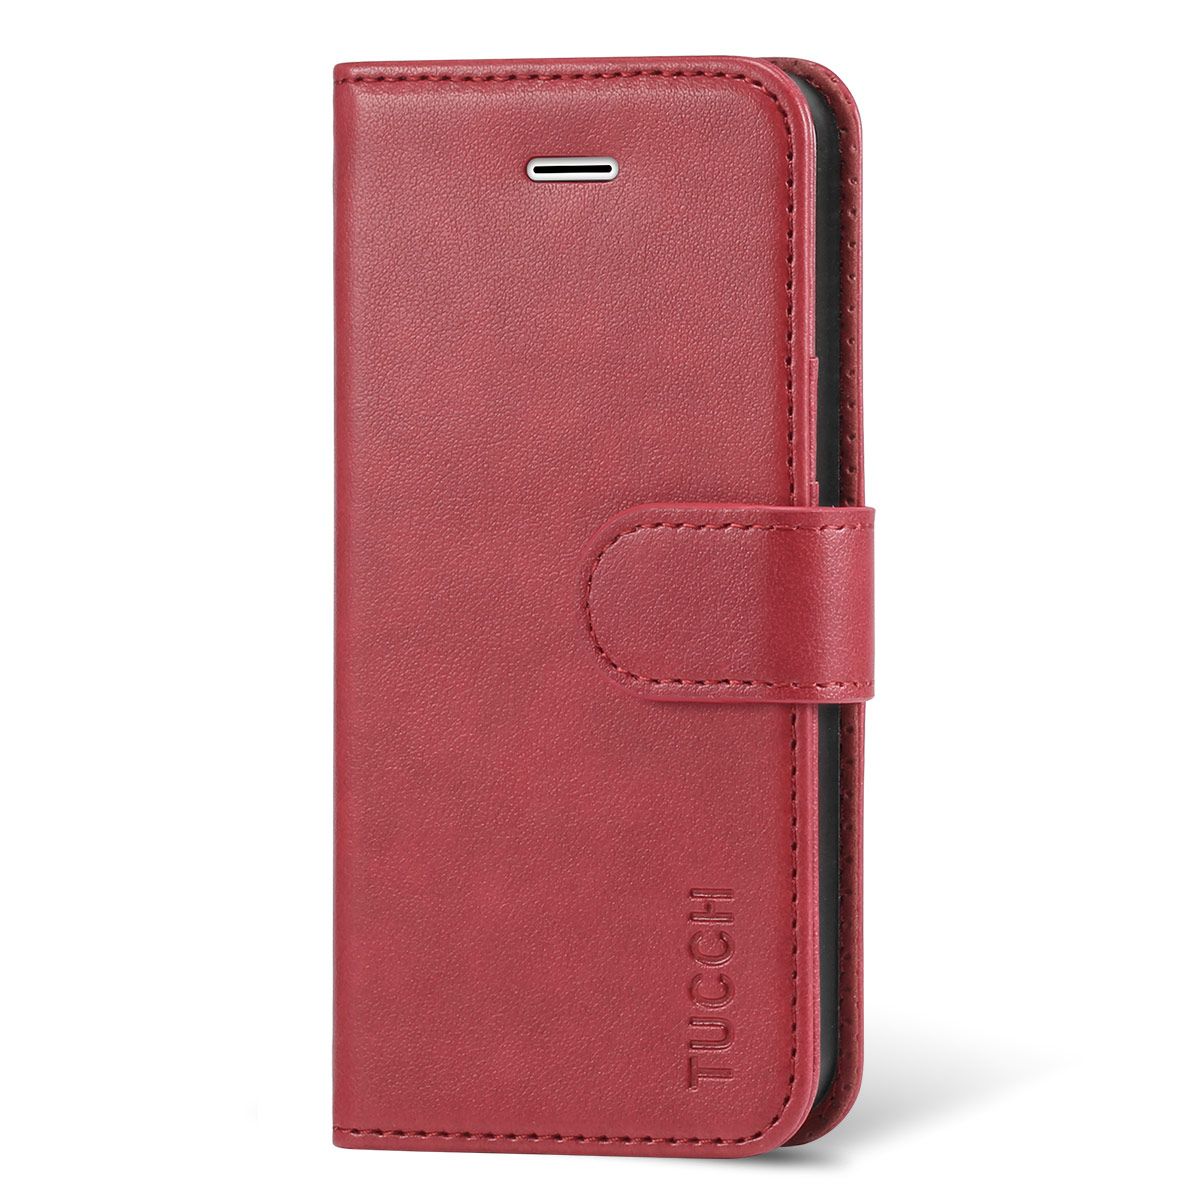 Leather Wallet Case, Magnetic Closure for iPhone SE/5S/5